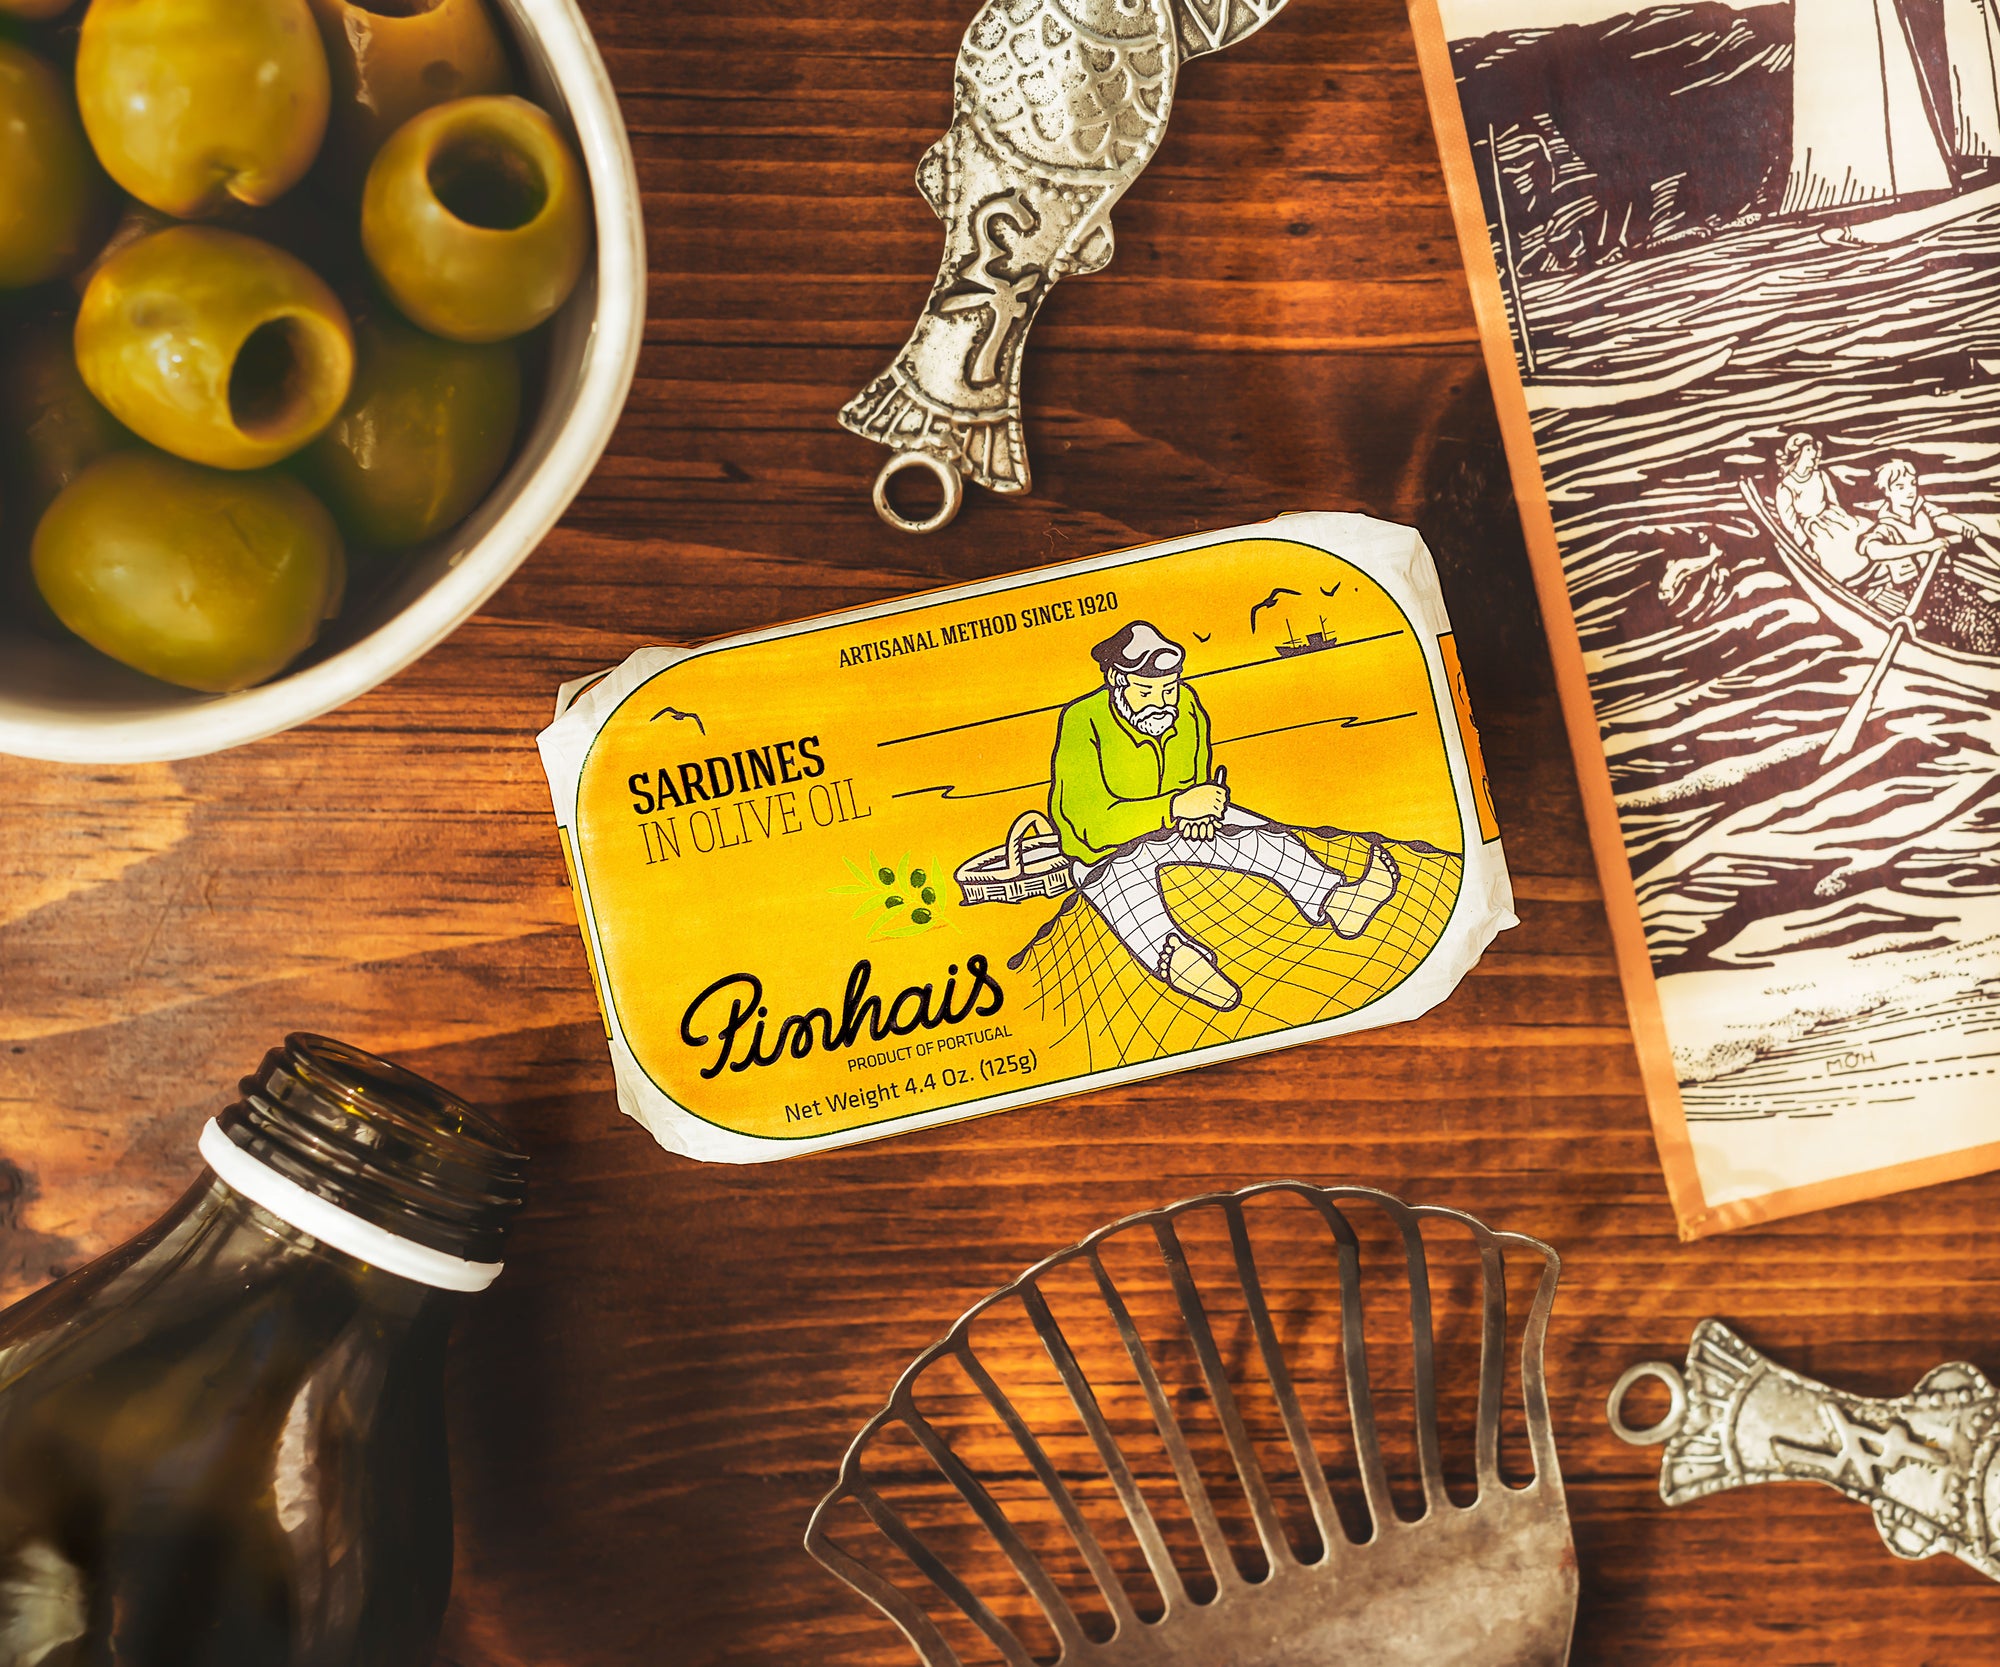 Pinhais Sardines in Olive Oil - Island Creek Oysters